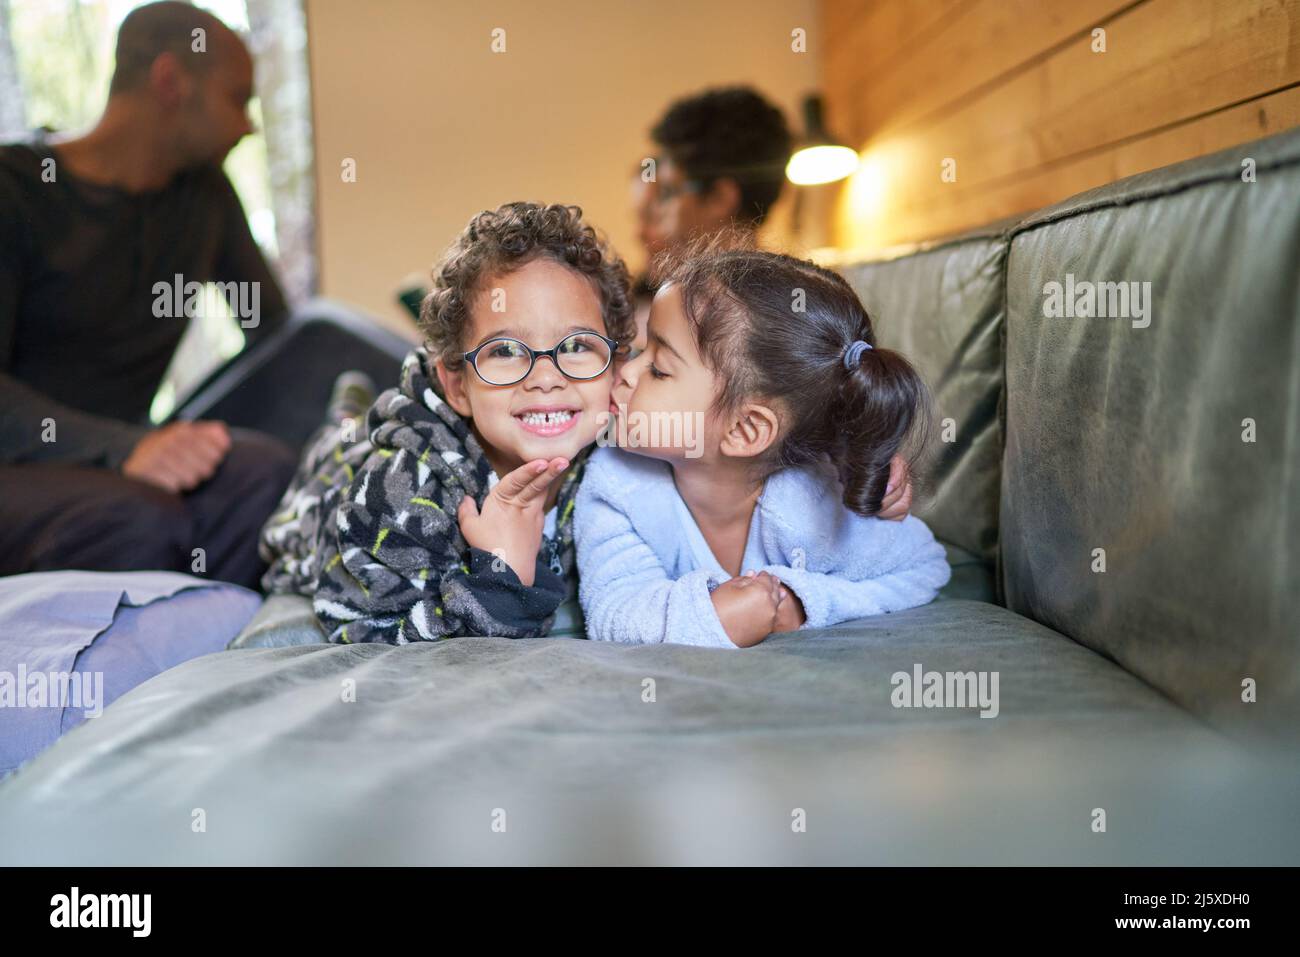 Portrait cute sister kissing brother on living room floor Stock Photo